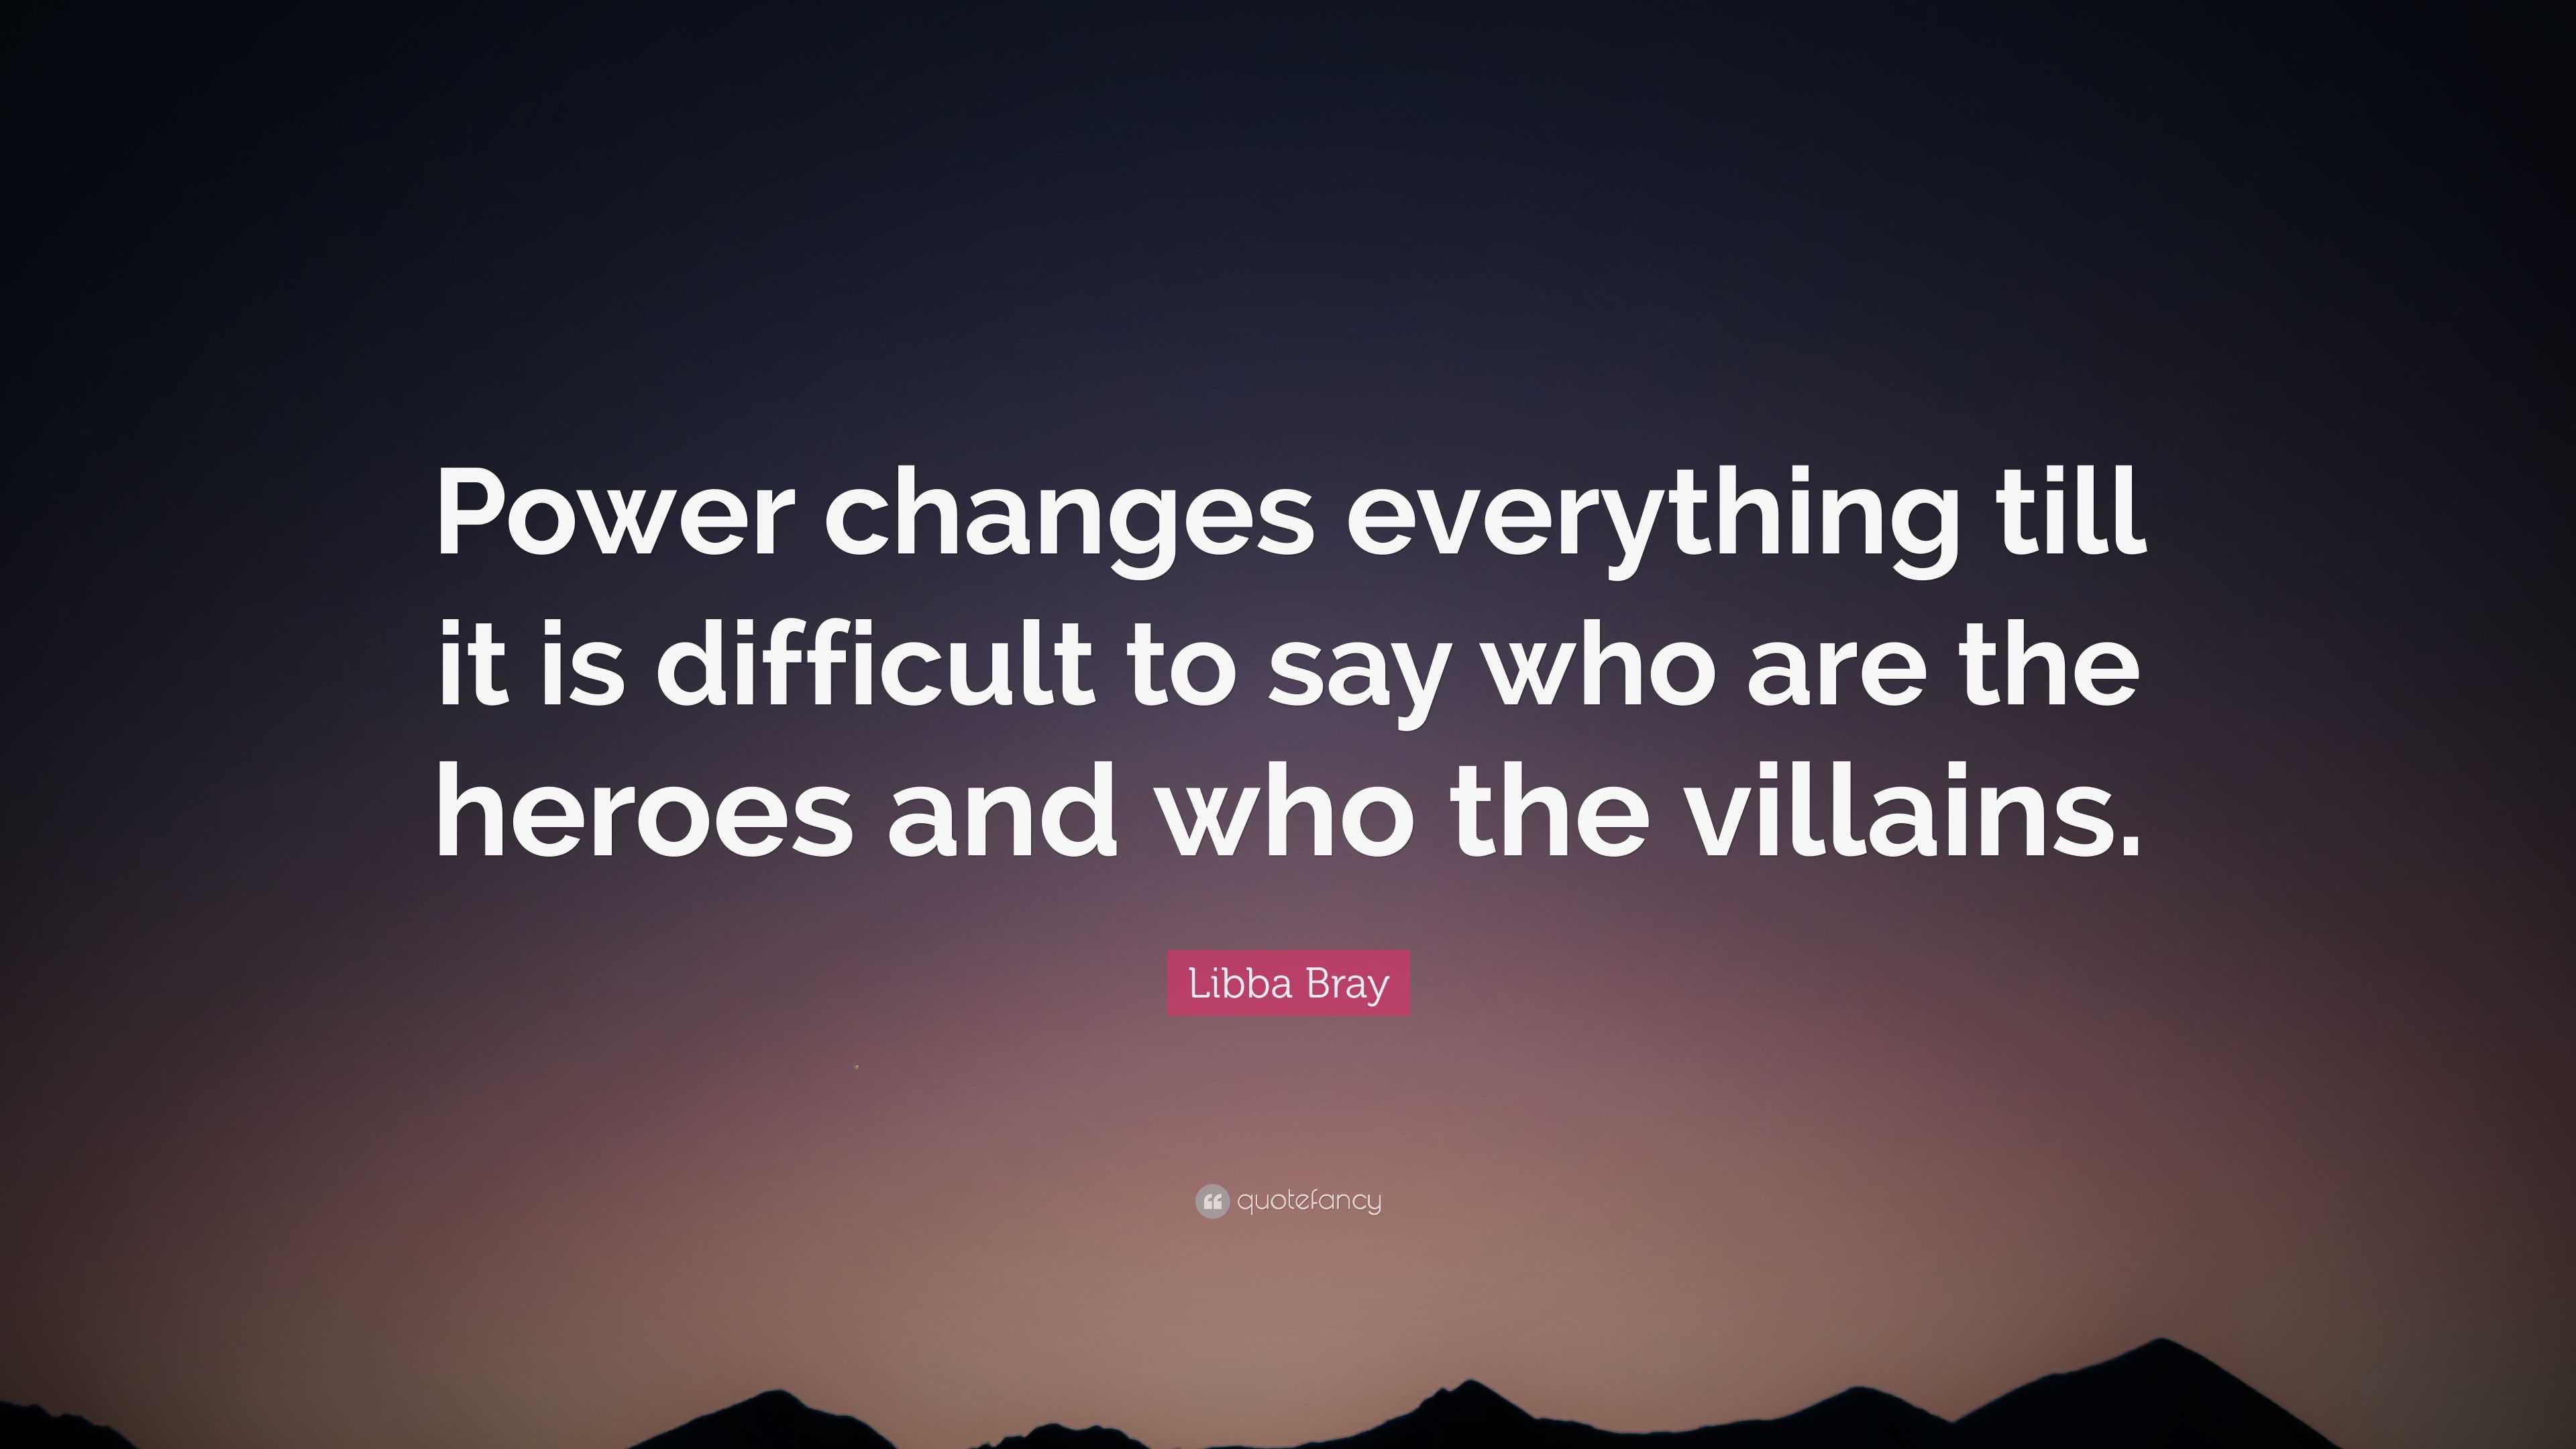 Libba Bray Quote: “Power changes everything till it is difficult to say ...